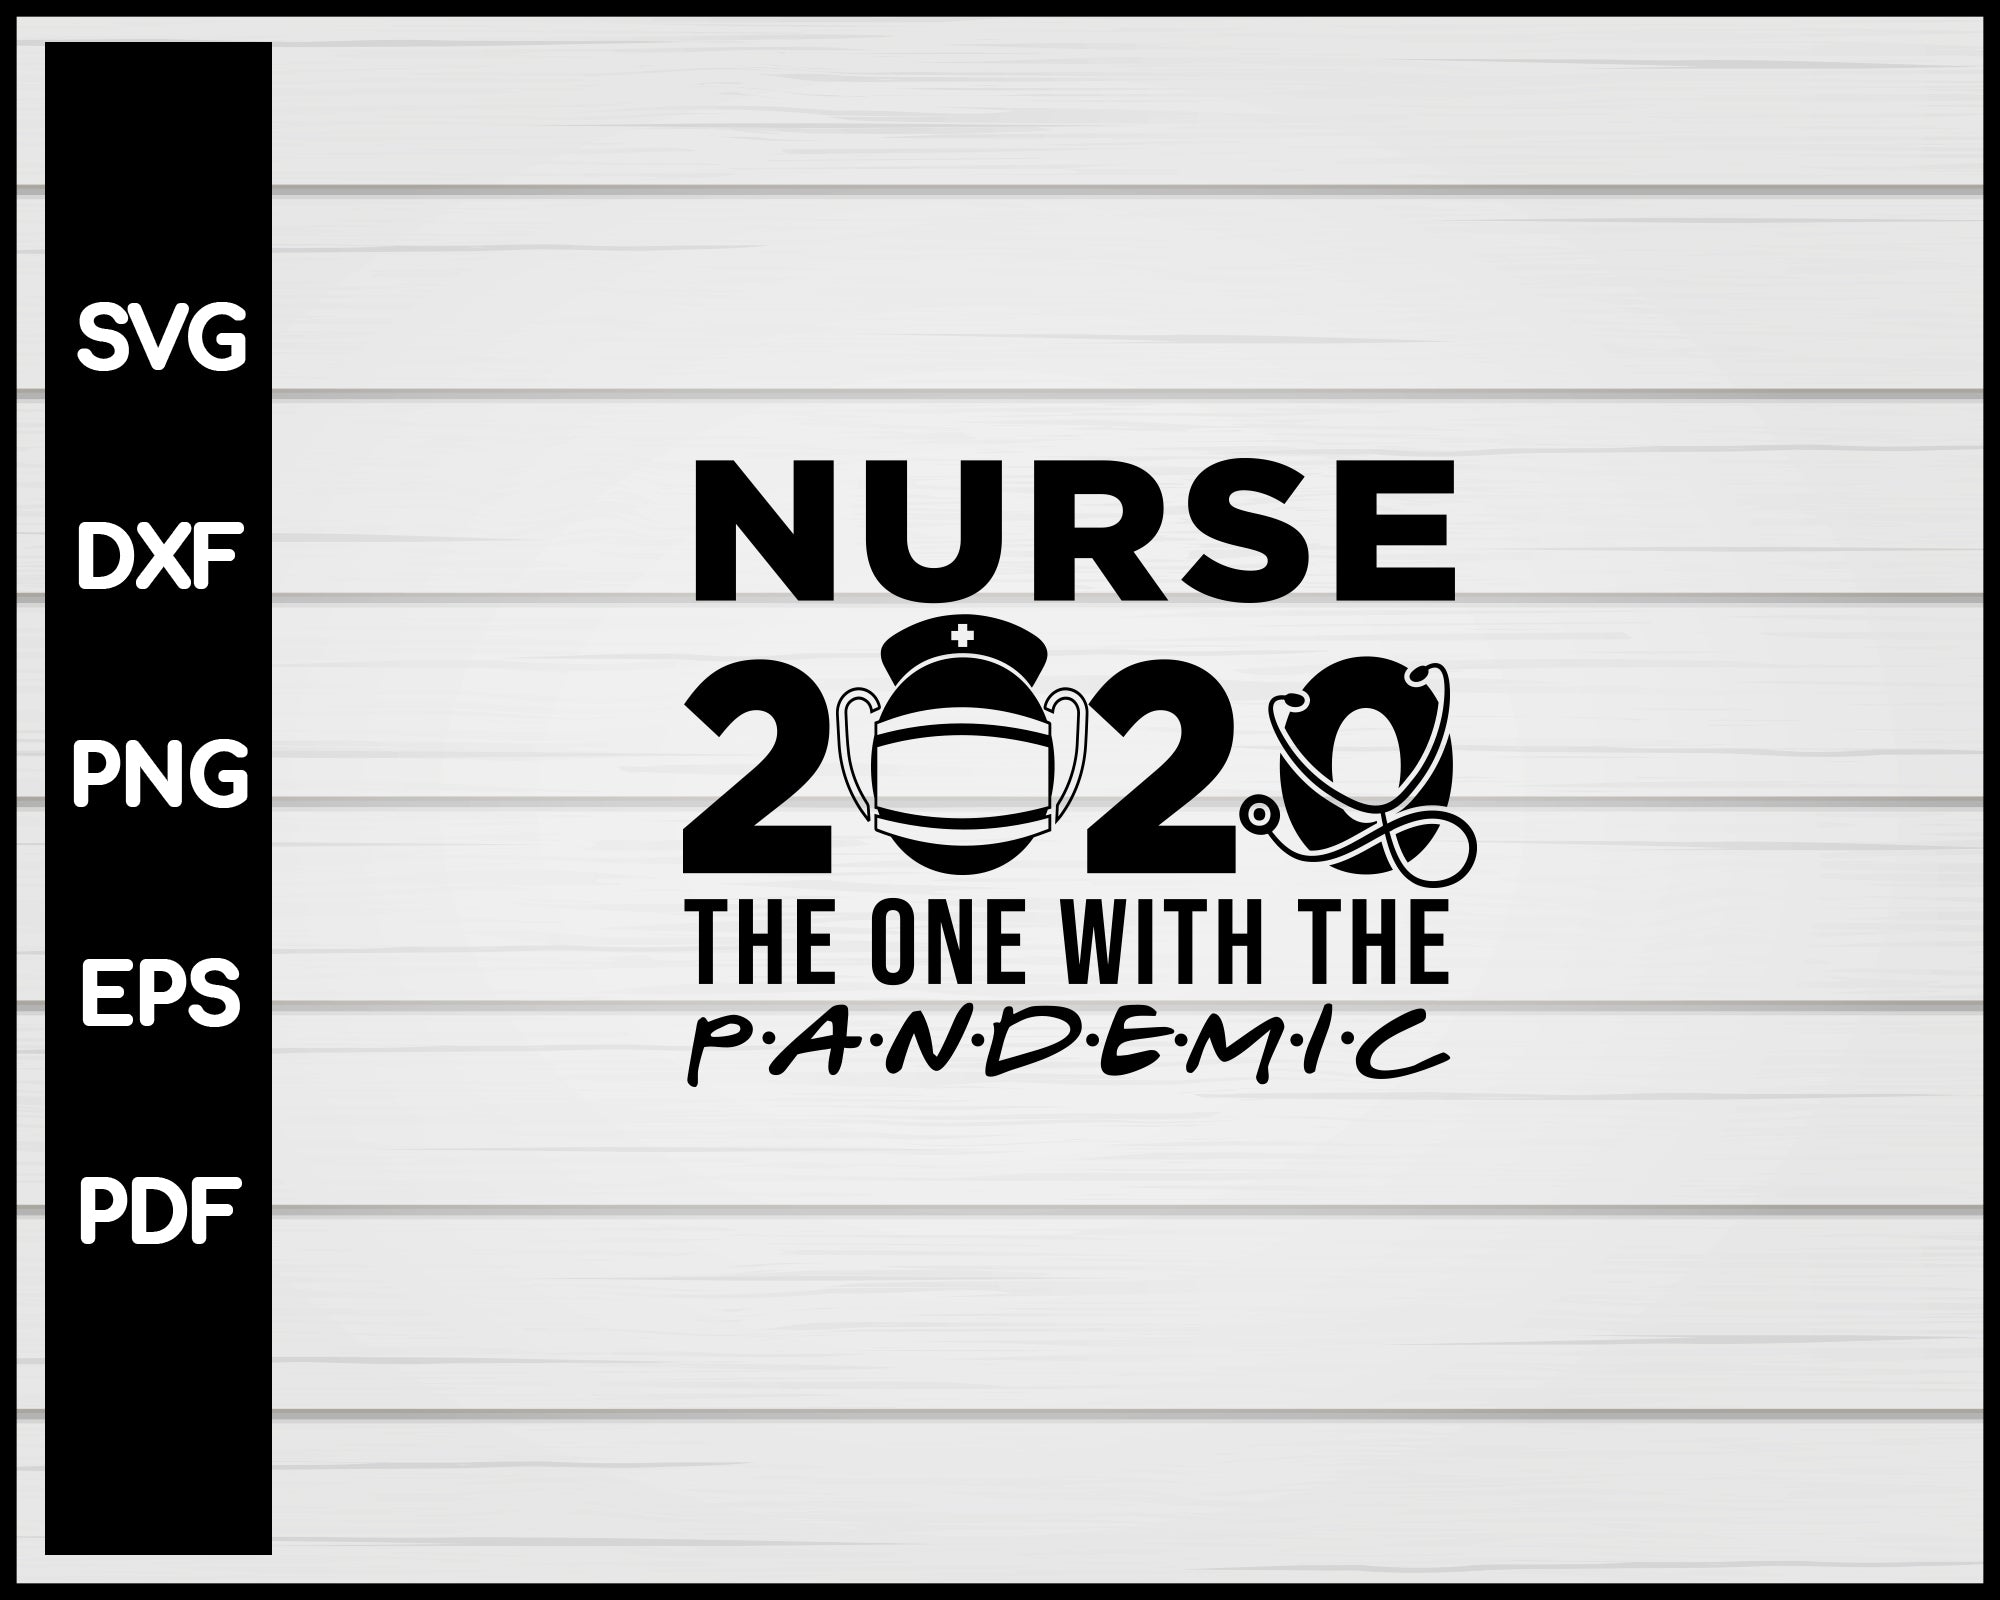 Nurse 2020 The One With The Pandemic svg Cut File For Cricut Silhouette eps png dxf Printable Files